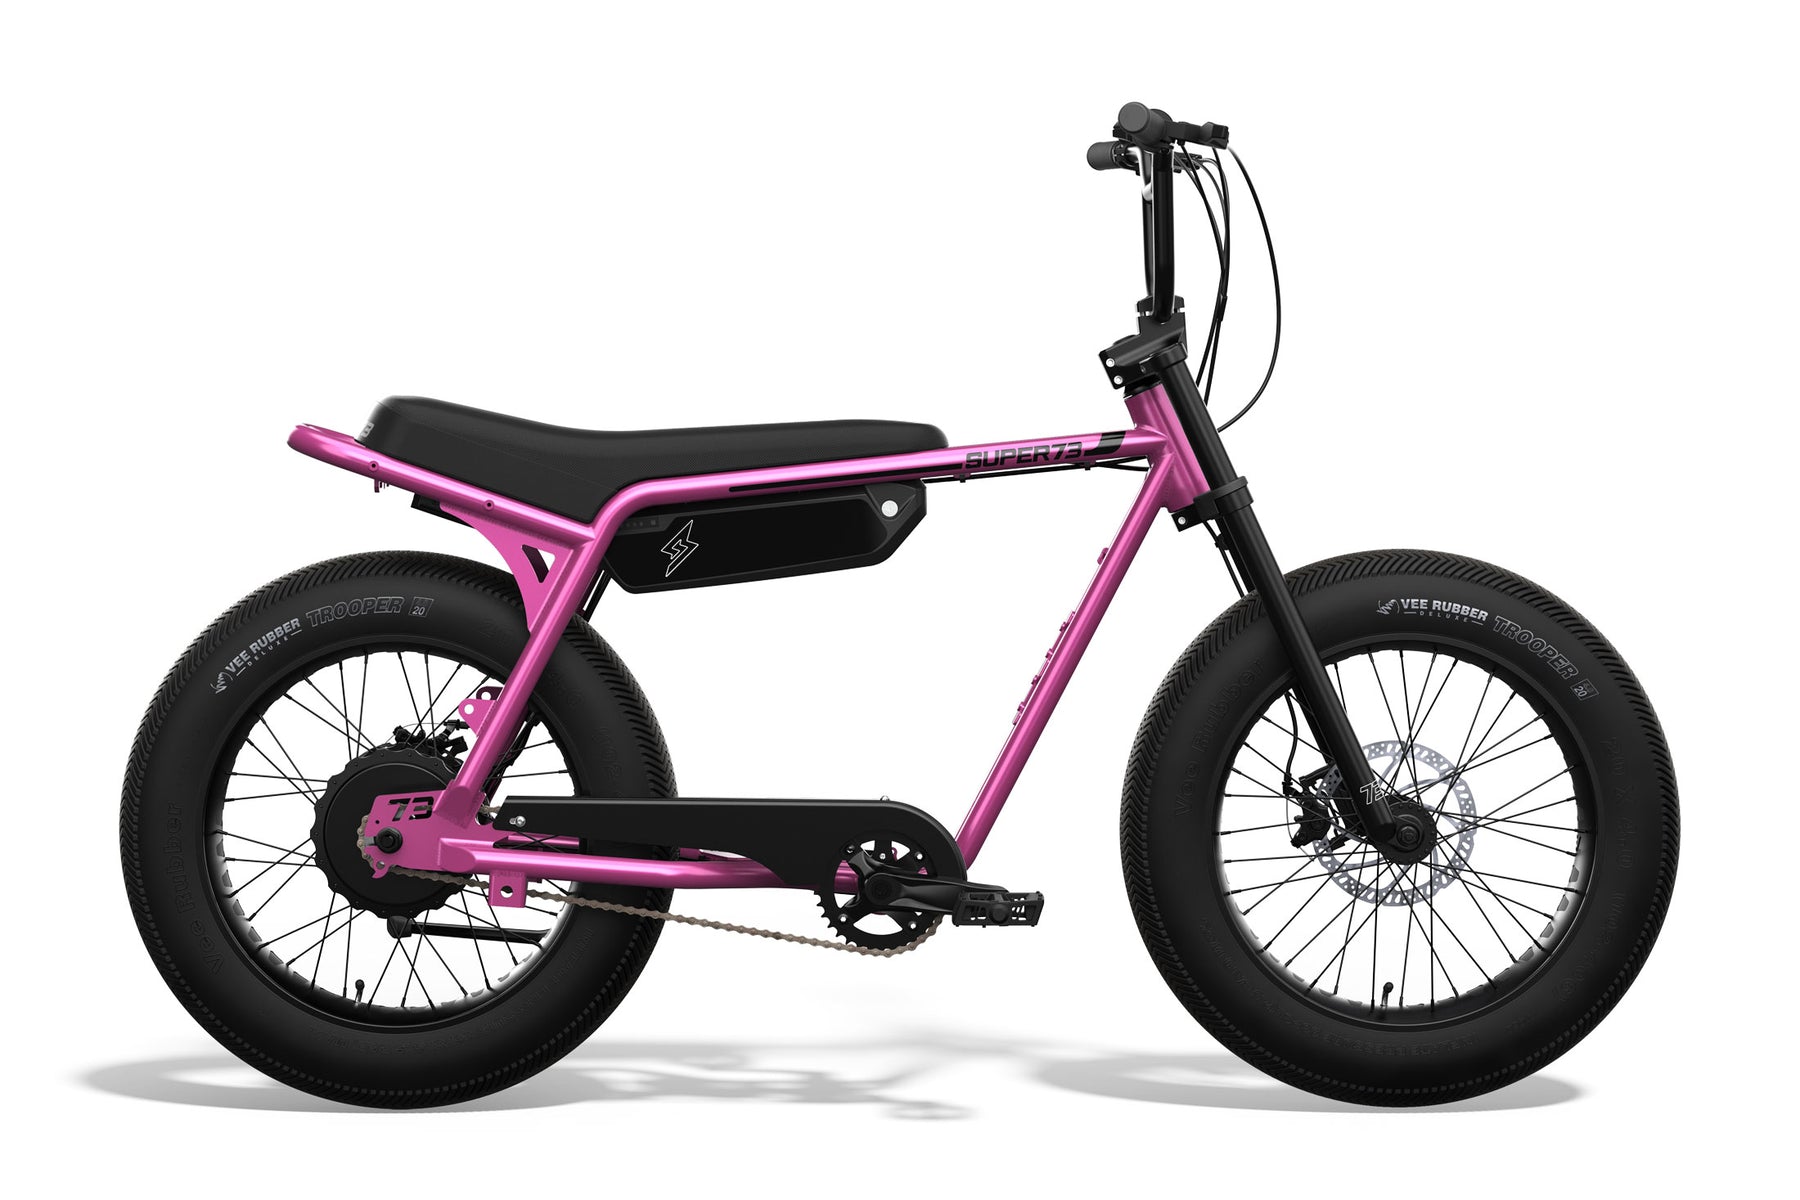 Side View of Z Miami: Pricky Pink, Super73 ebike